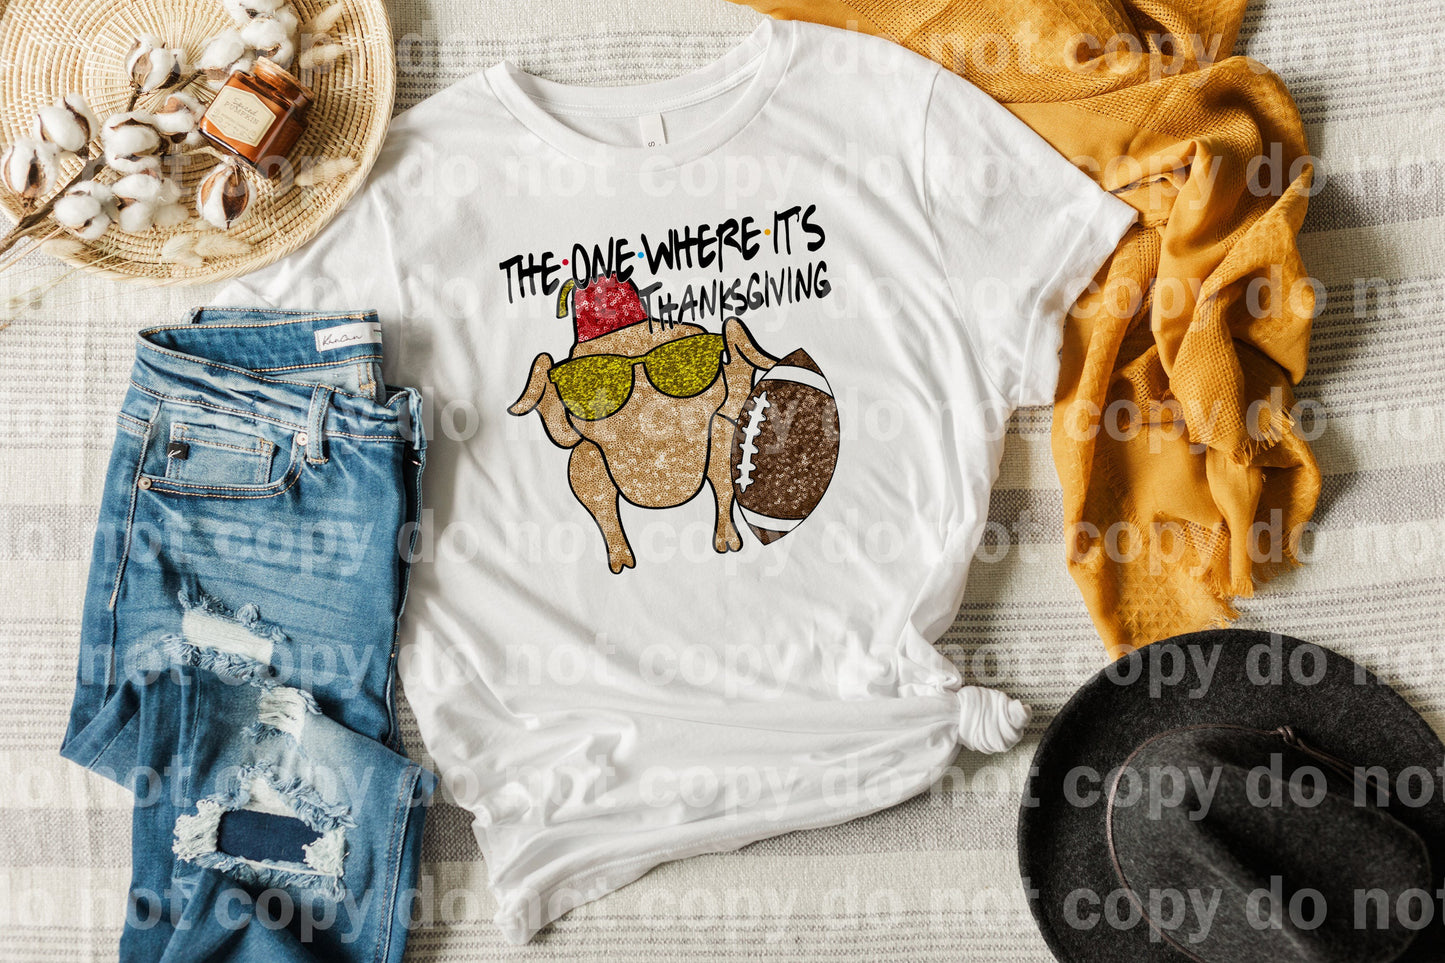 The One Where It's Thanksgiving Sequin Dream Print or Sublimation Print